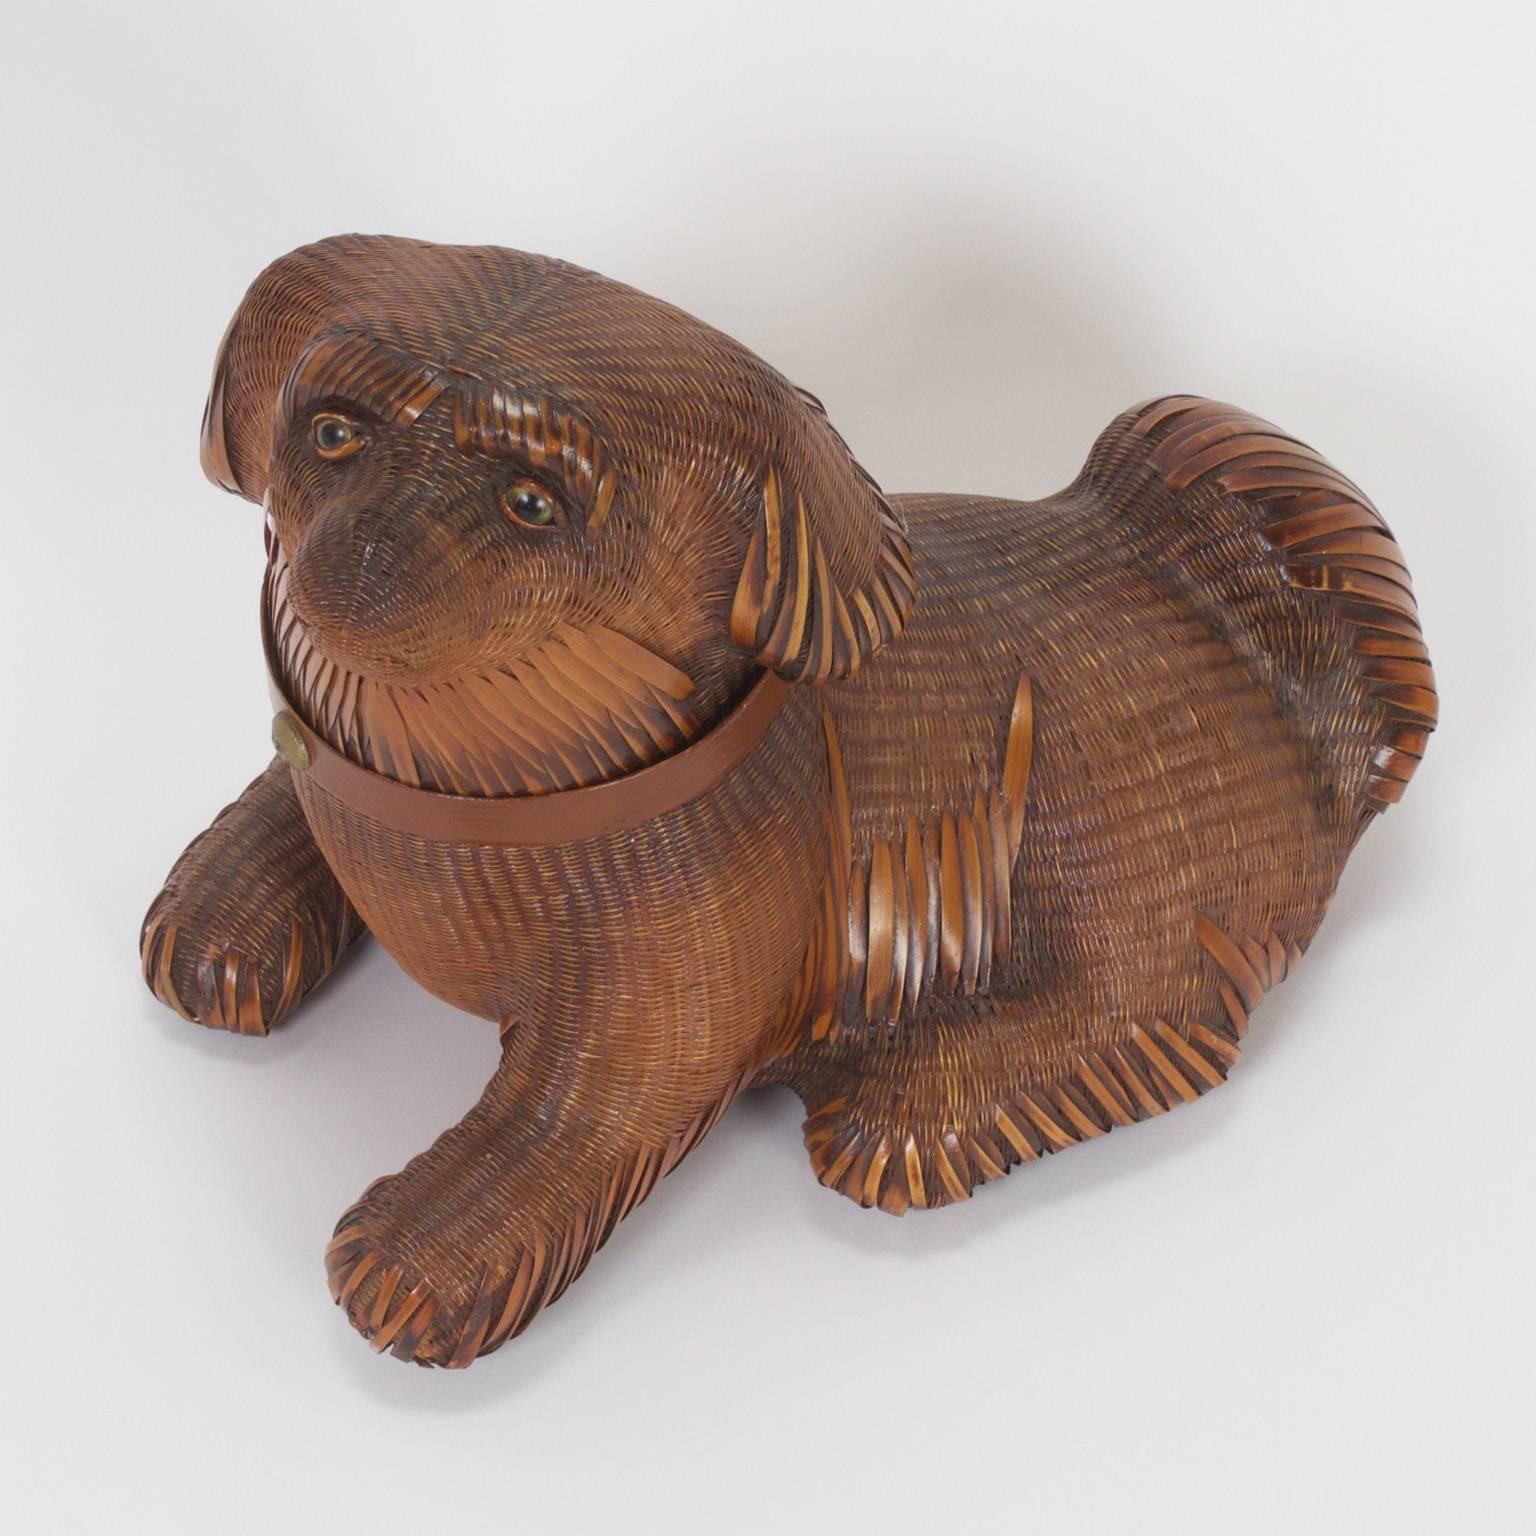 Adorable pekingese dog box expertly crafted from wicker and reed with care and ambition, having a surprisingly realistic posture and attitude. Woof.

  